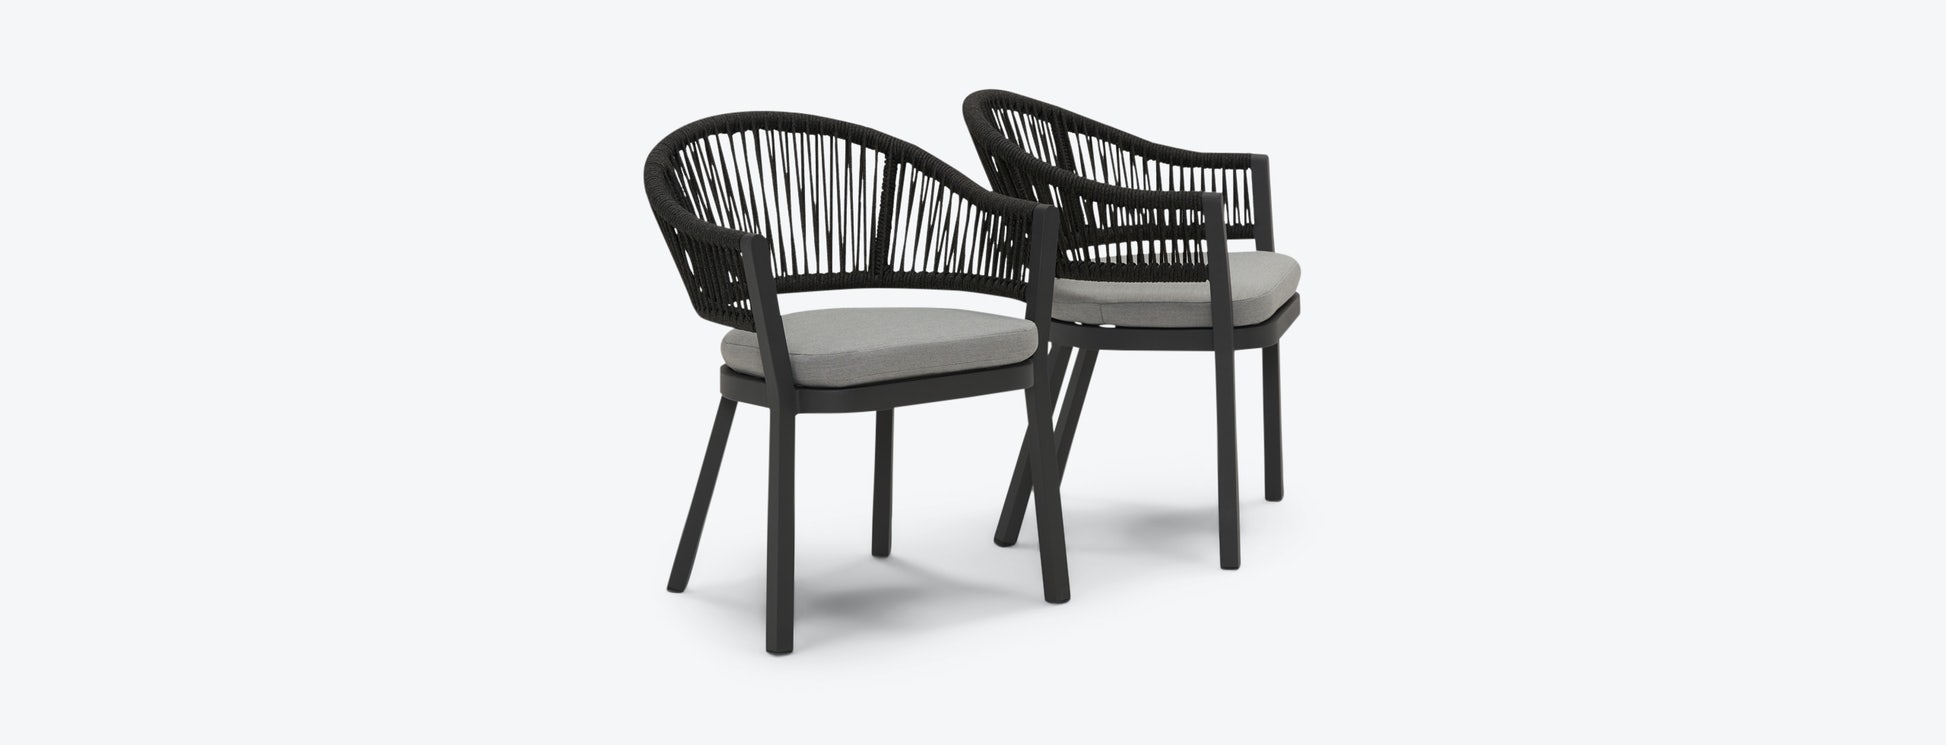 Catalina Outdoor Dining Chair (Set of 2) - Image 1